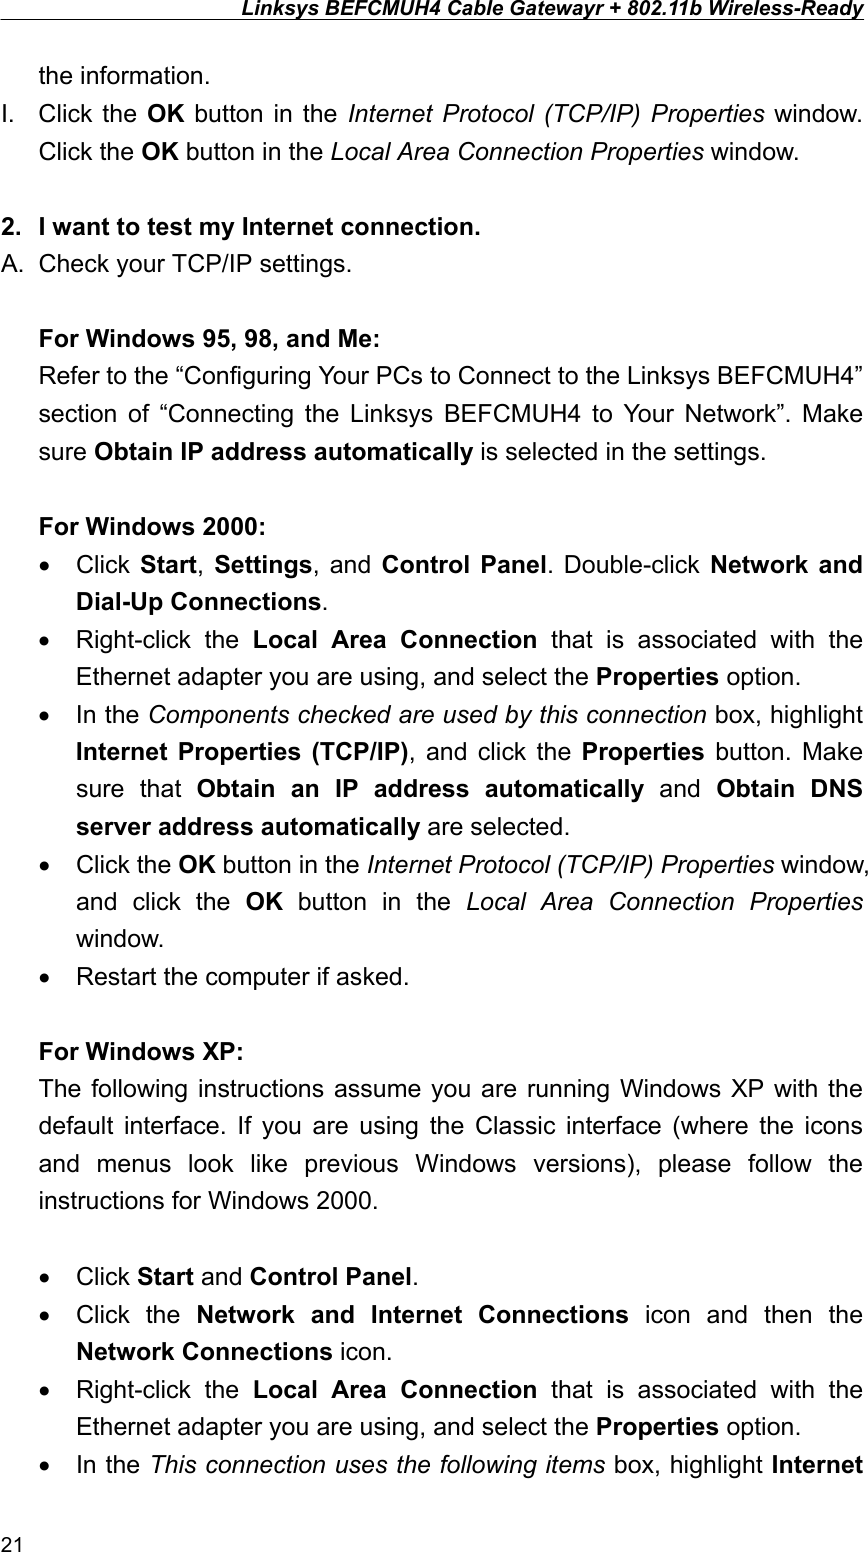 Linksys BEFCMUH4 Cable Gatewayr + 802.11b Wireless-Ready  the information. I. Click the OK button in the Internet Protocol (TCP/IP) Properties window. Click the OK button in the Local Area Connection Properties window.  2.  I want to test my Internet connection. A.  Check your TCP/IP settings.  For Windows 95, 98, and Me: Refer to the “Configuring Your PCs to Connect to the Linksys BEFCMUH4” section of “Connecting the Linksys BEFCMUH4 to Your Network”. Make sure Obtain IP address automatically is selected in the settings.  For Windows 2000: •  Click  Start,  Settings, and Control Panel. Double-click Network and Dial-Up Connections. •  Right-click the Local Area Connection that is associated with the Ethernet adapter you are using, and select the Properties option. •  In the Components checked are used by this connection box, highlight Internet Properties (TCP/IP), and click the Properties button. Make sure that Obtain an IP address automatically and Obtain DNS server address automatically are selected. •  Click the OK button in the Internet Protocol (TCP/IP) Properties window, and click the OK button in the Local Area Connection Properties window. •  Restart the computer if asked.  For Windows XP: The following instructions assume you are running Windows XP with the default interface. If you are using the Classic interface (where the icons and menus look like previous Windows versions), please follow the instructions for Windows 2000.  •  Click Start and Control Panel. •  Click the Network and Internet Connections icon and then the Network Connections icon. •  Right-click the Local Area Connection that is associated with the Ethernet adapter you are using, and select the Properties option. •  In the This connection uses the following items box, highlight Internet 21 